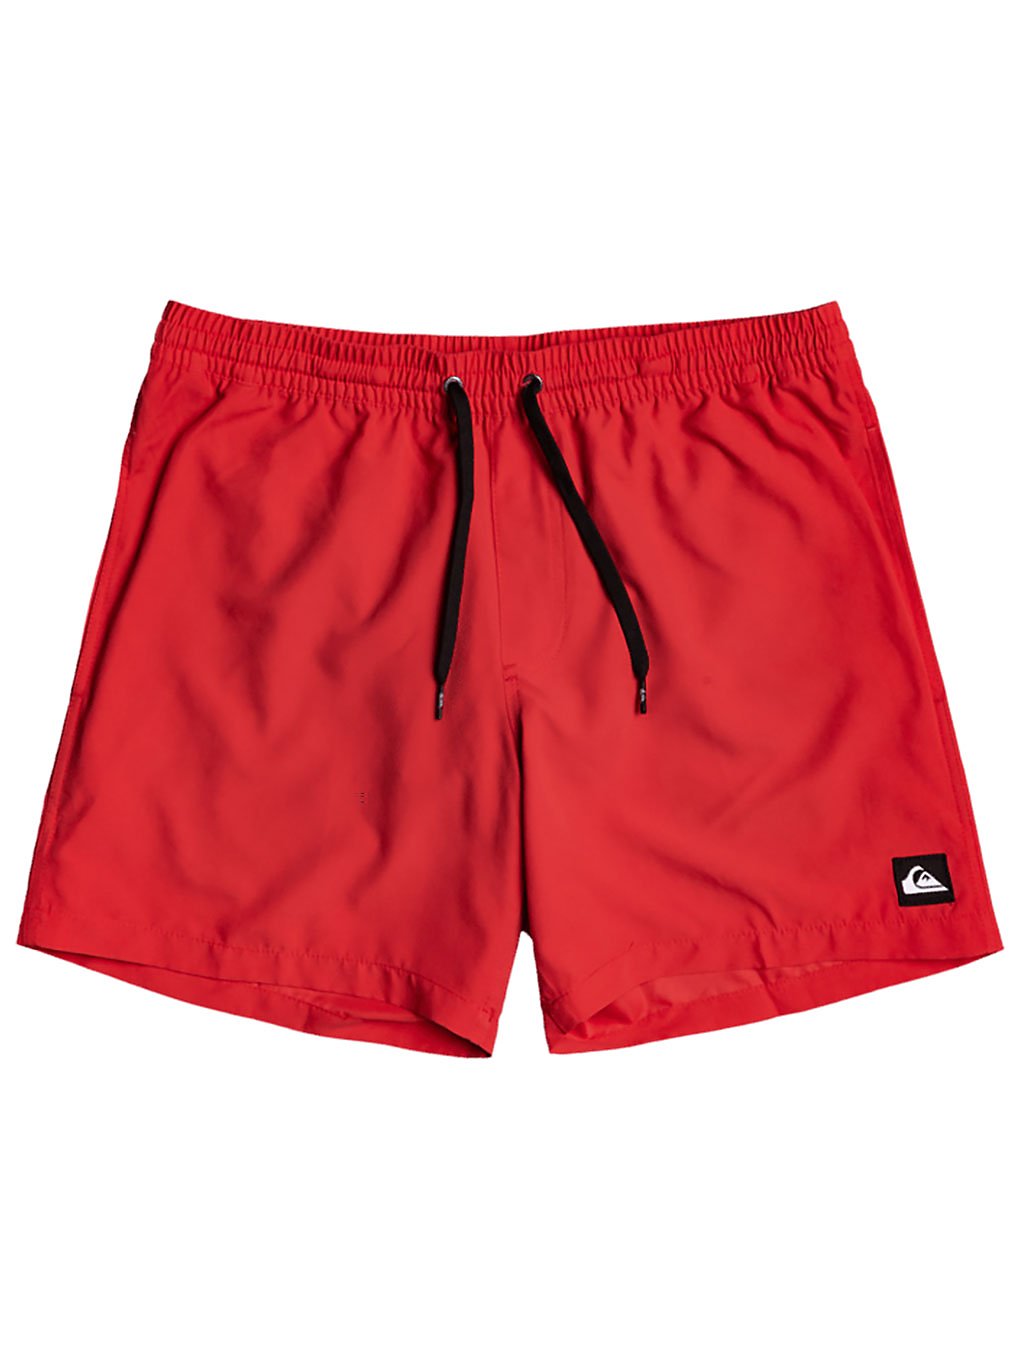 Quiksilver Everyday Volley 13 Boardshorts high risk red